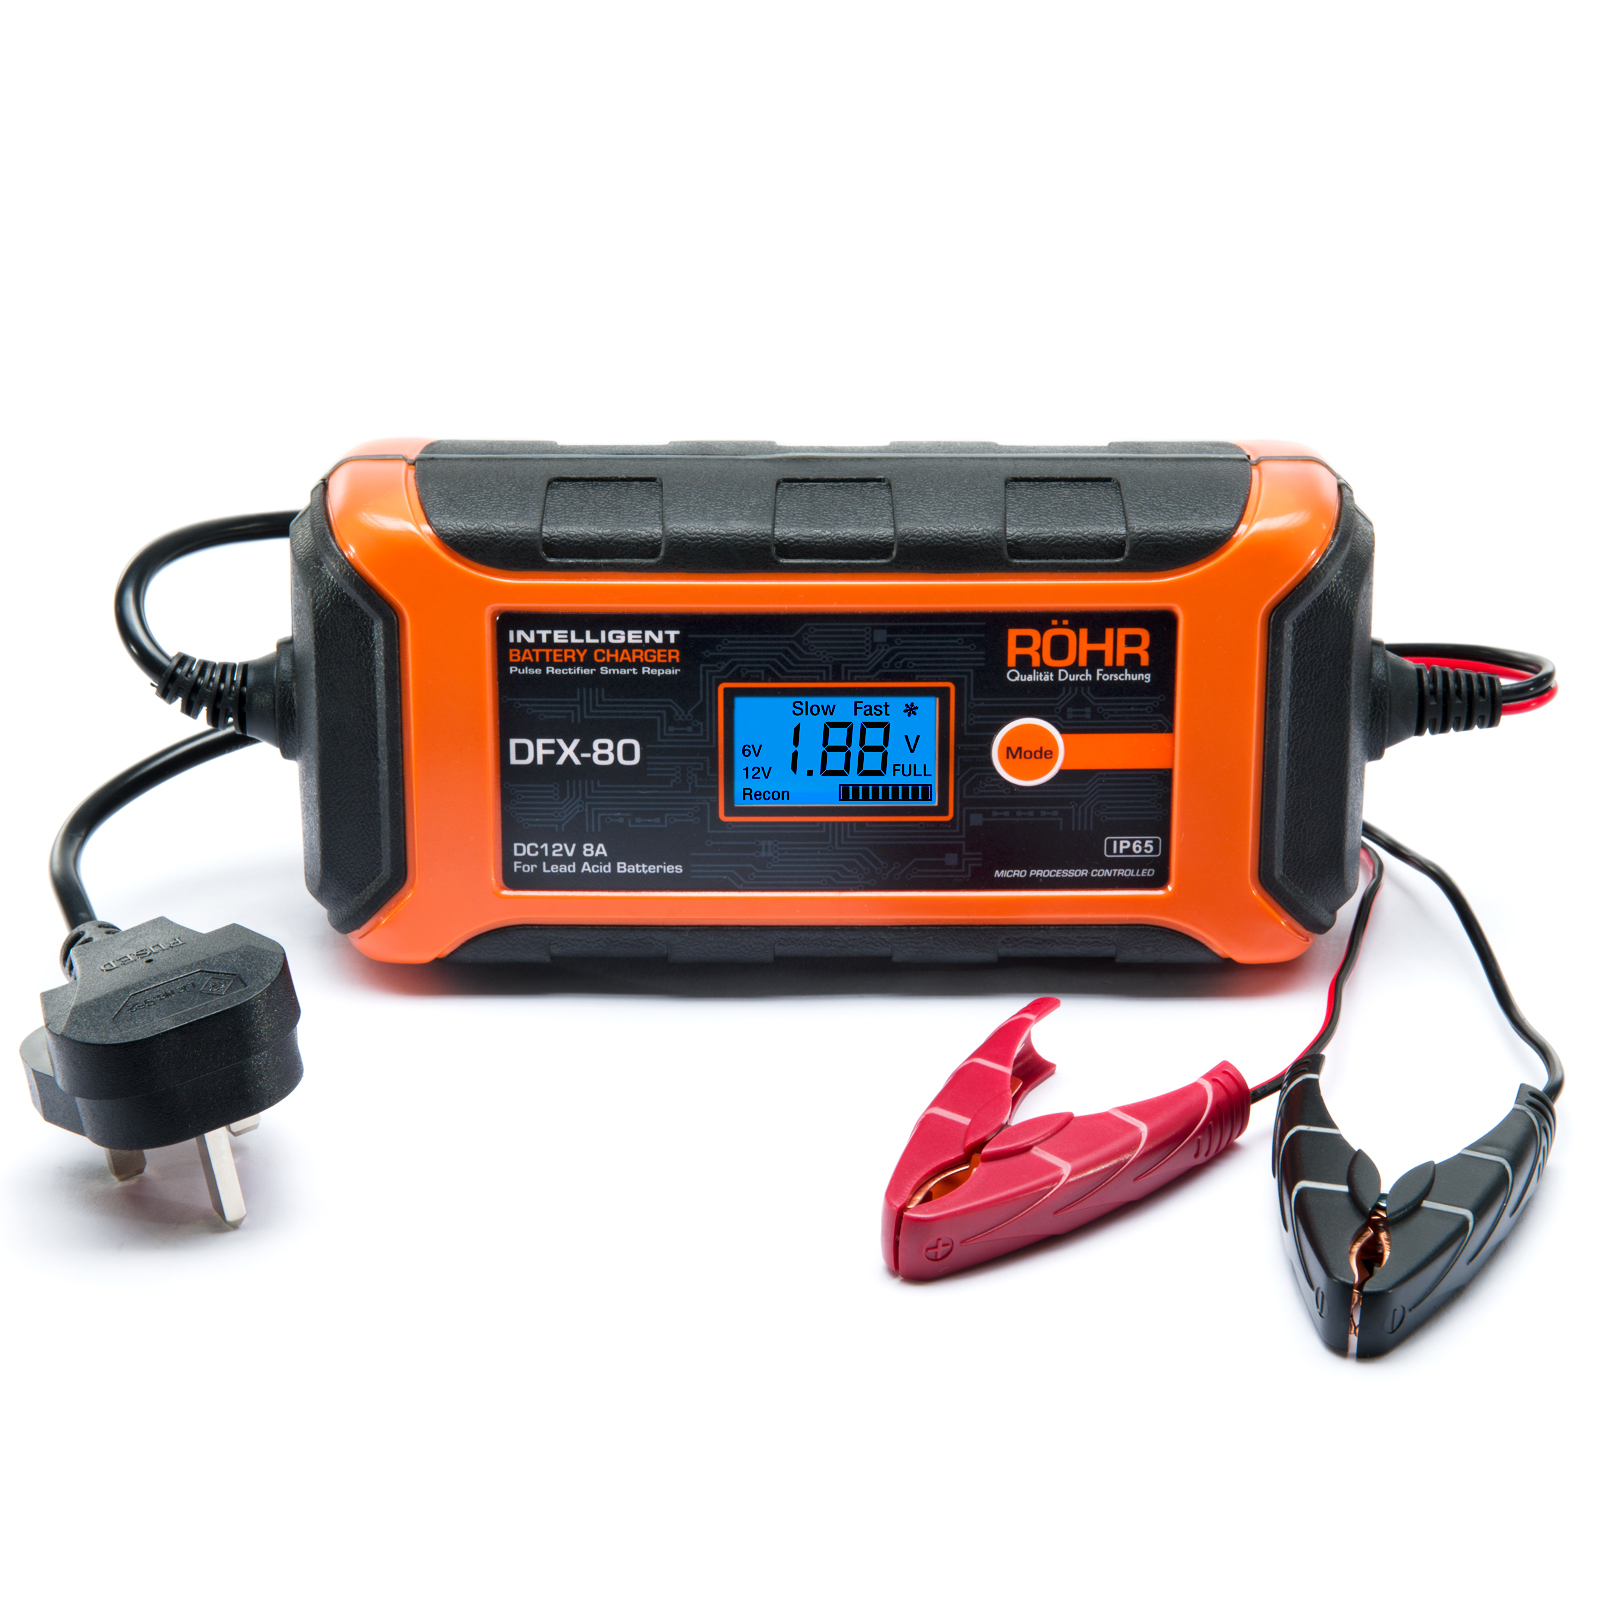 Röhr Car Battery Charger Heavy Duty Fast Maintainer Charge 12v 24v DFC-650P